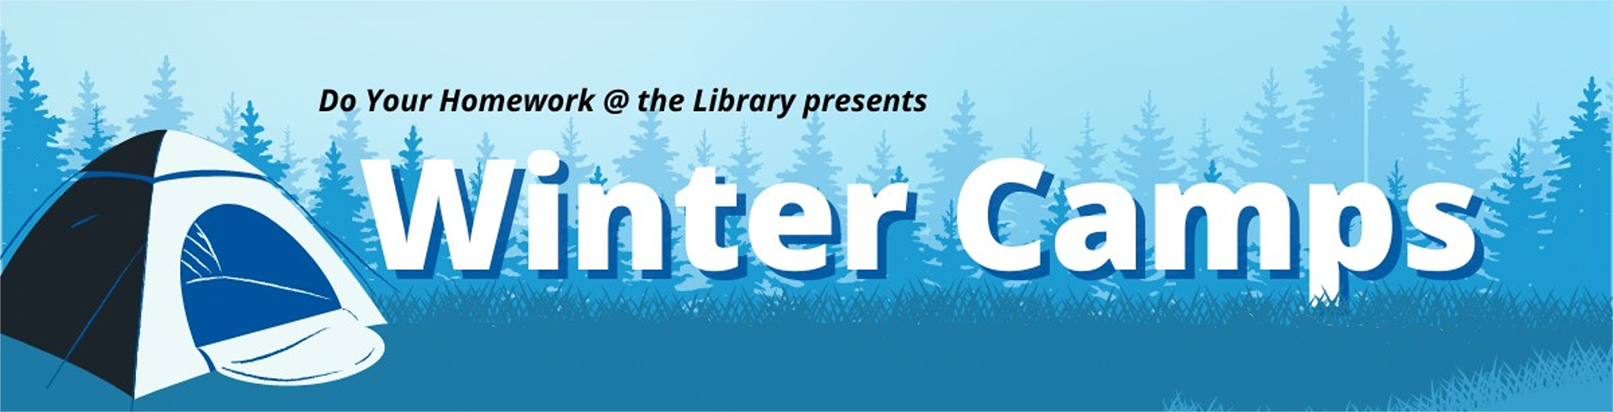 Do Your Homework @ the Library Winter Camps banner